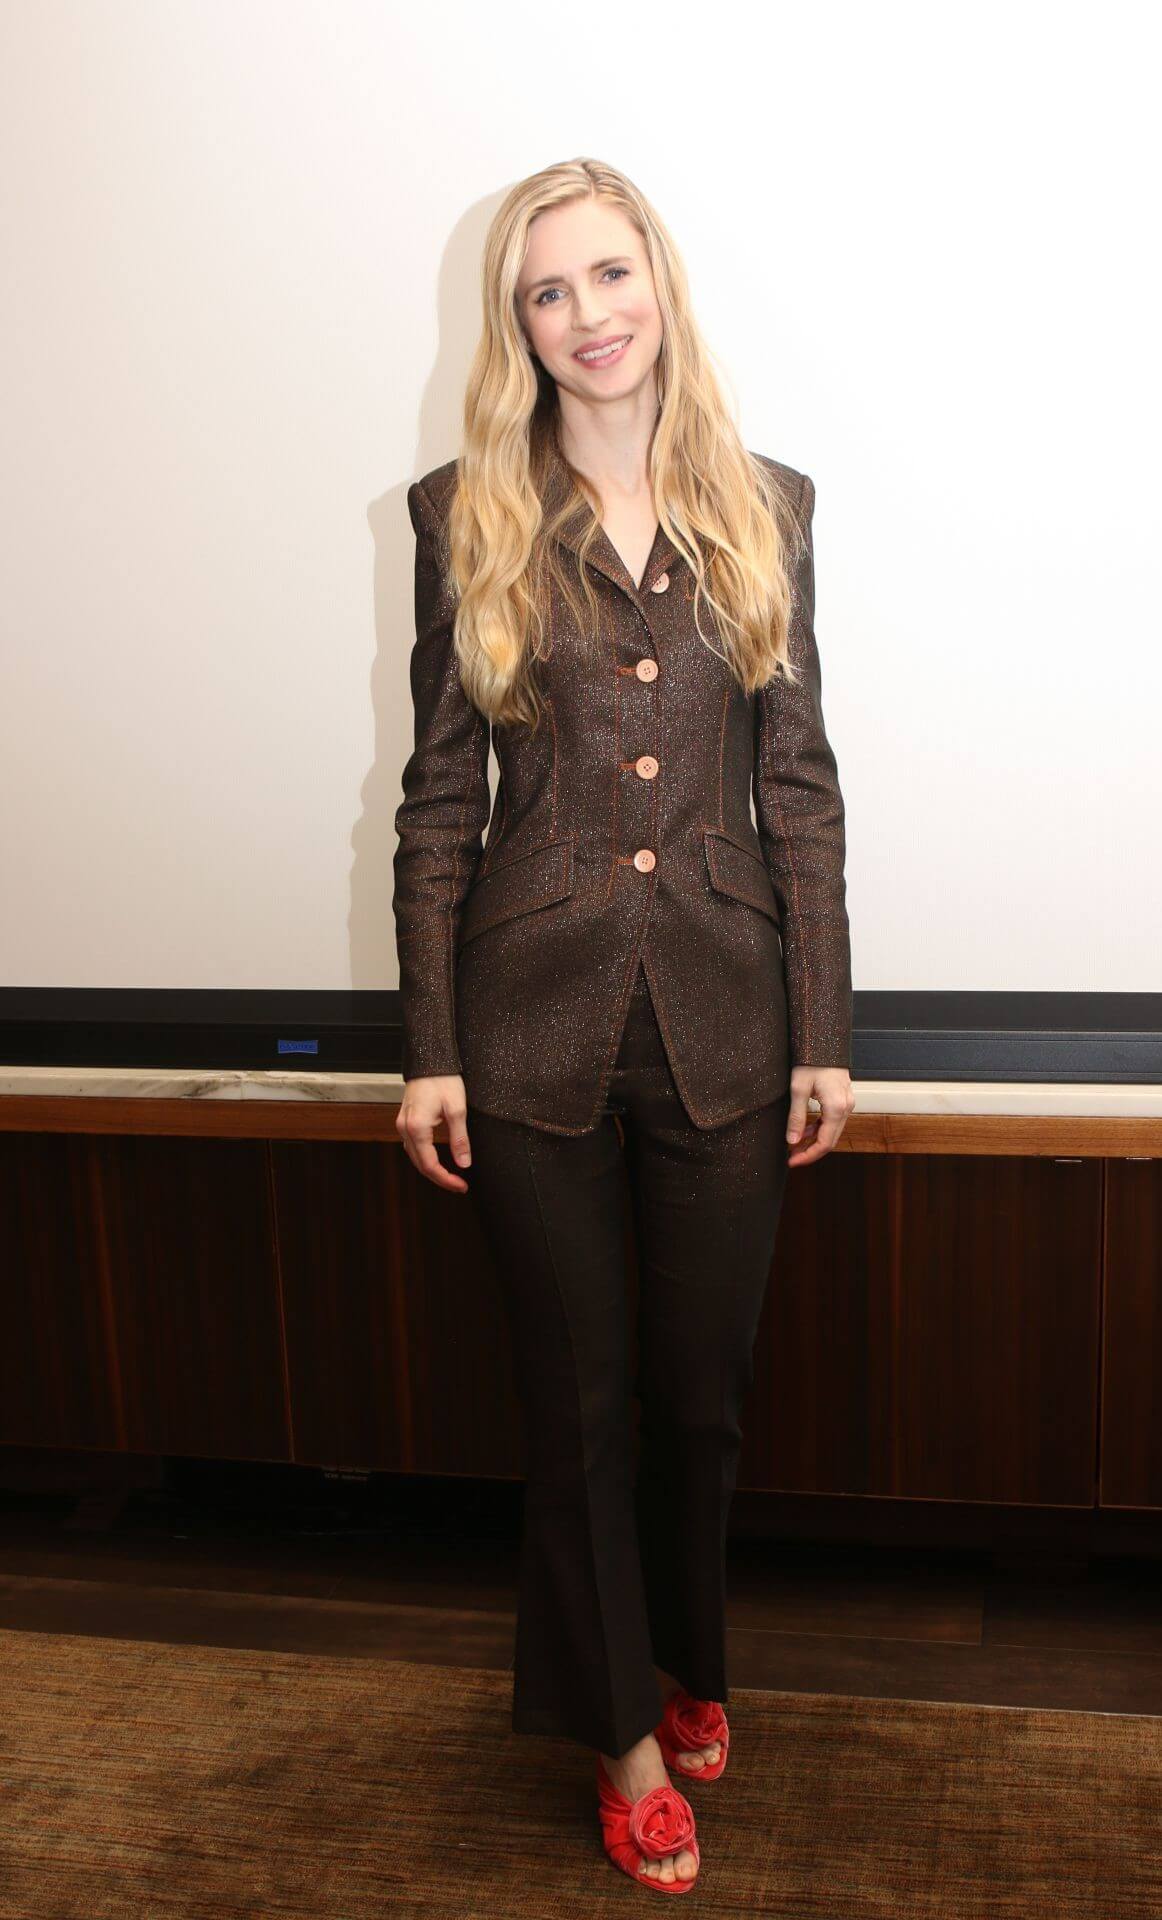 Brit Marling  In Brown Shimmery  Blazer With Black Pants At “The OA Part II” Press Conference in LA